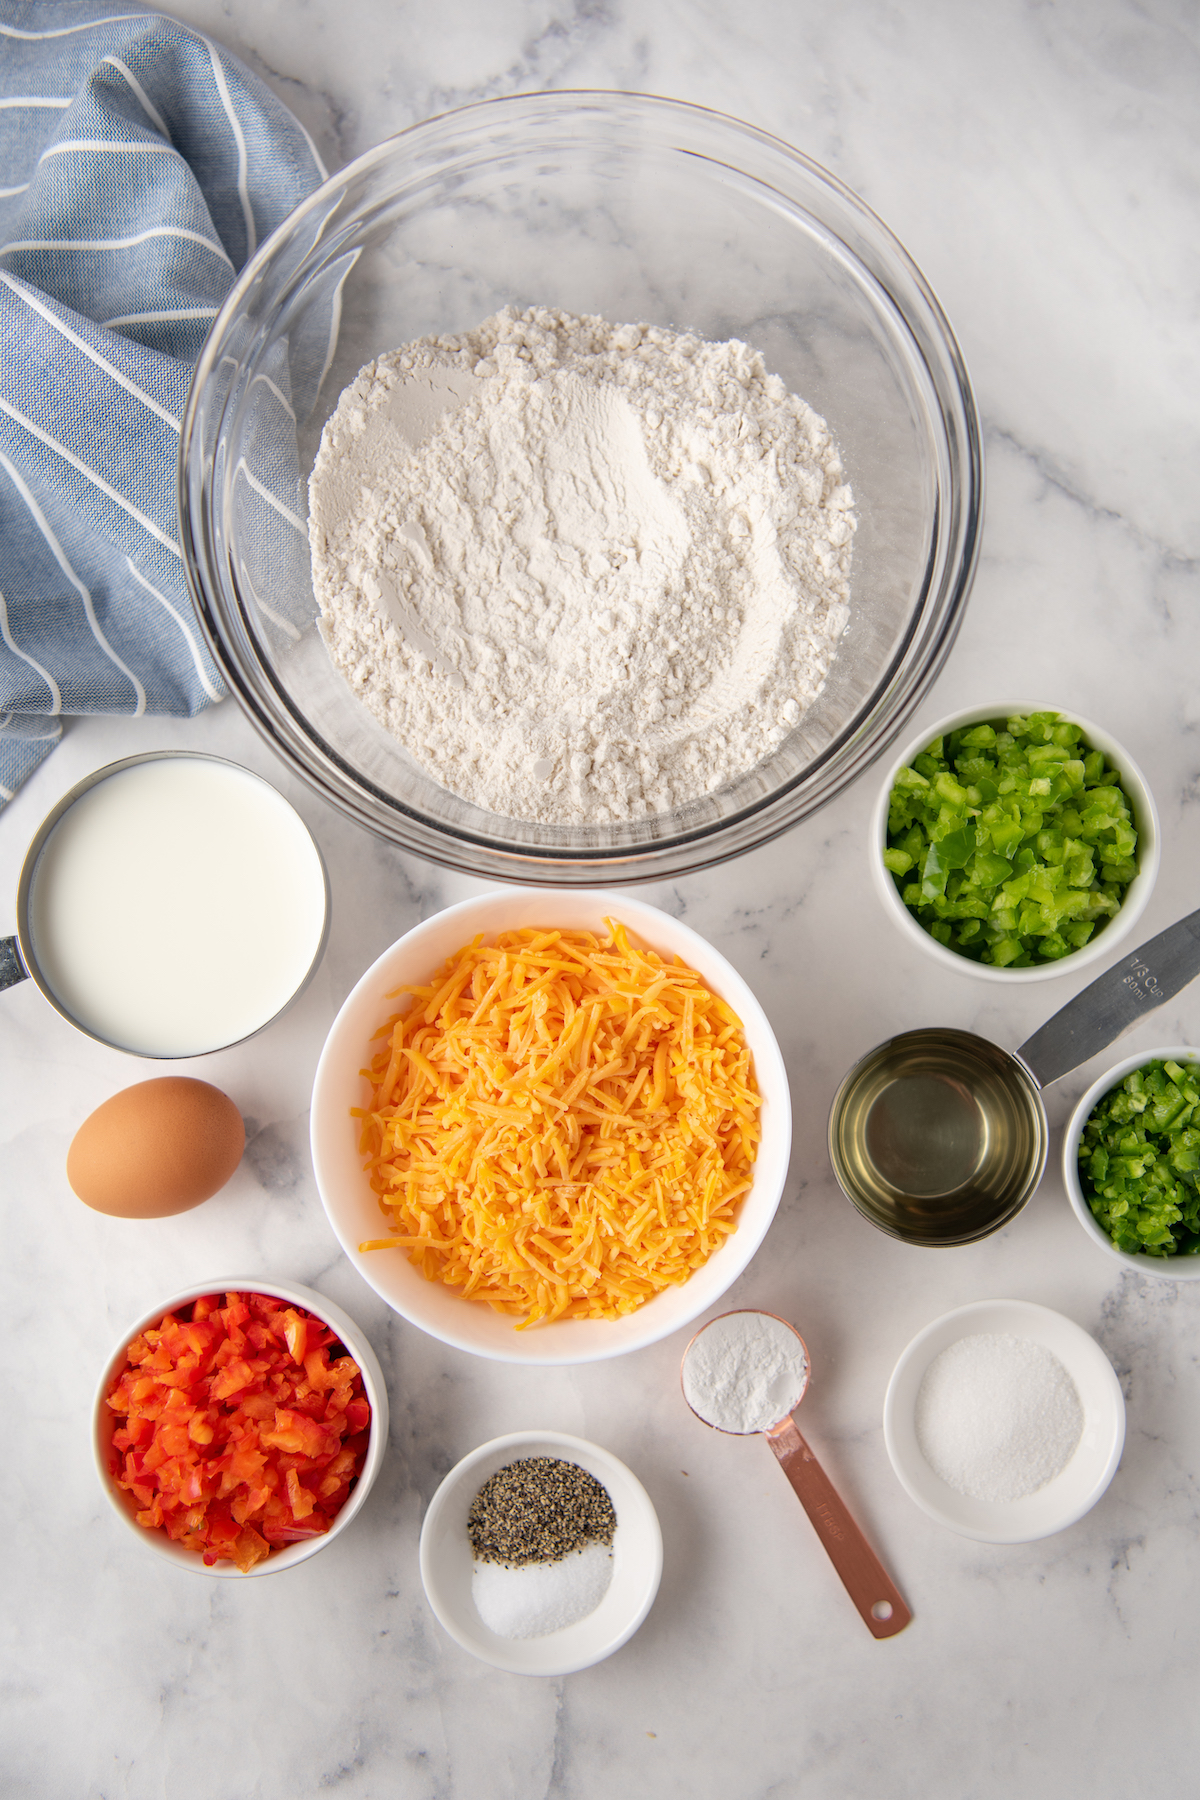 From top: All-purpose flour, milk, cheddar cheese, diced green bell pepper, one egg, vegetable oil, diced jalapeno, diced red bell pepper, salt and black pepper, baking soda, salt.